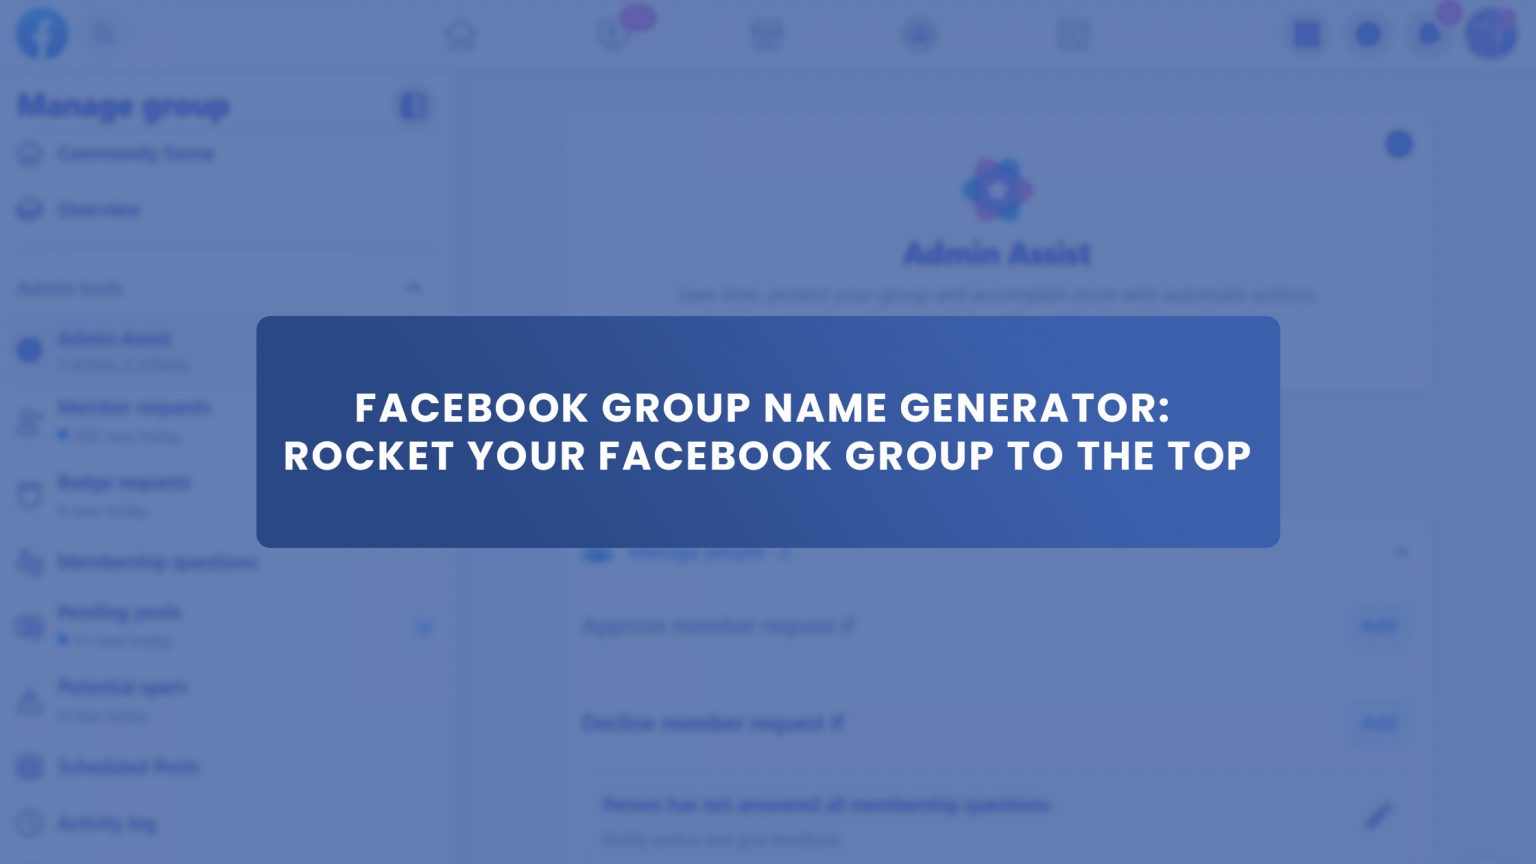 Facebook Group Name Generator Rocket your Facebook Group to the Top